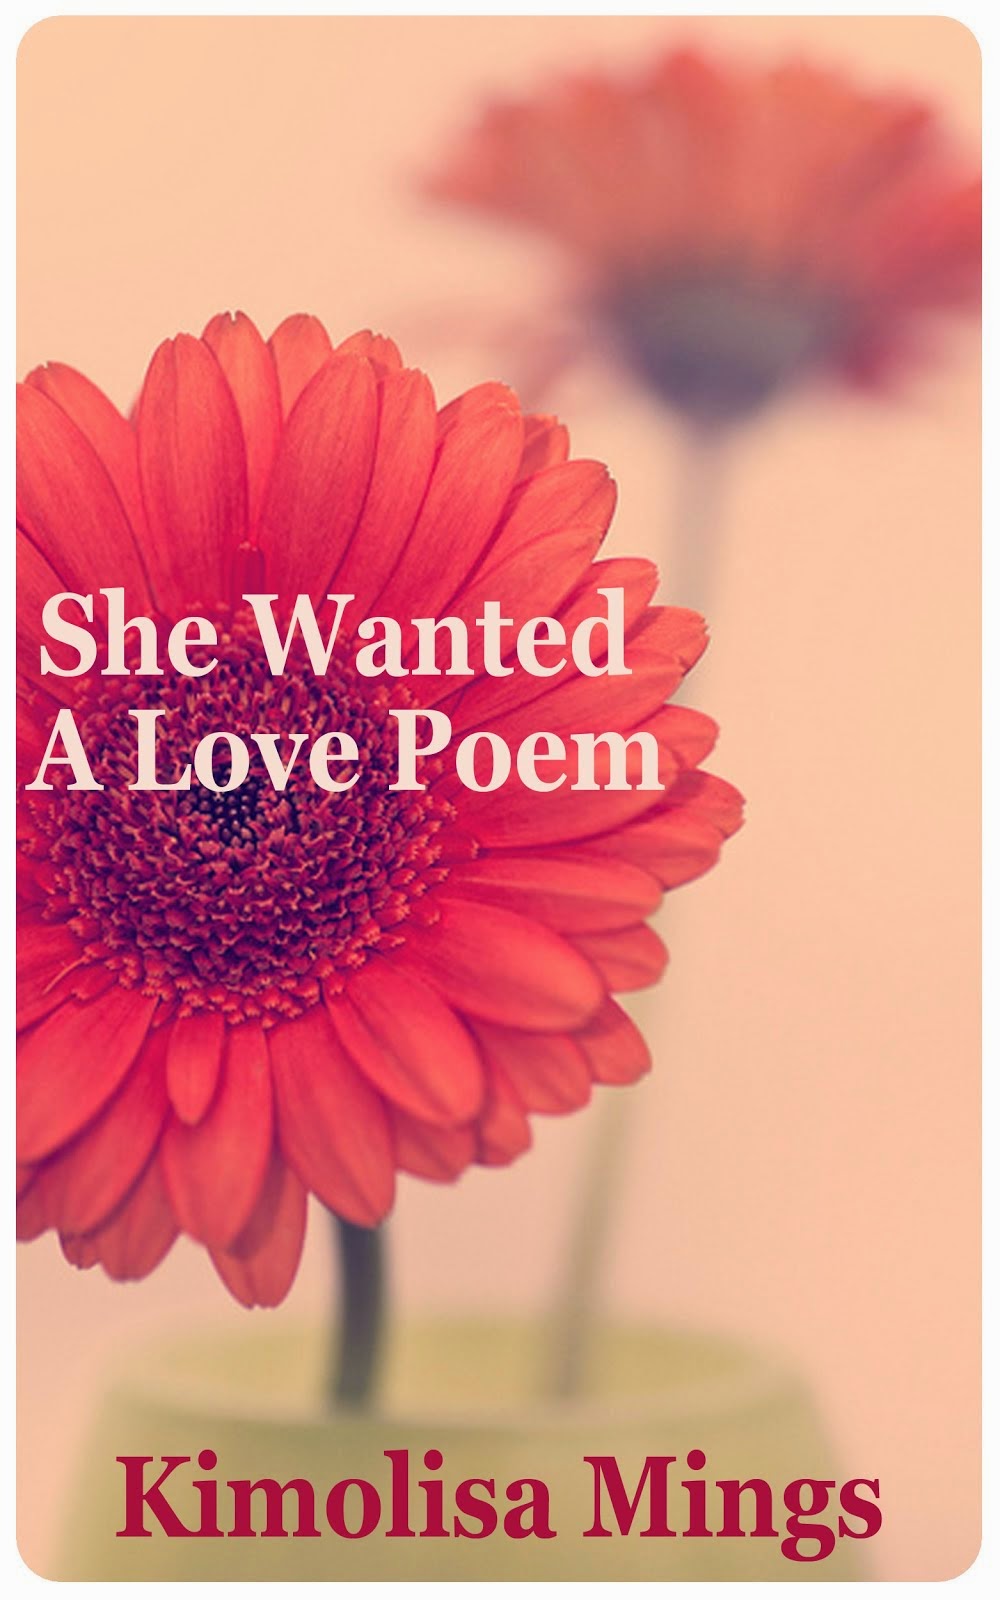 She Wanted A Love Poem